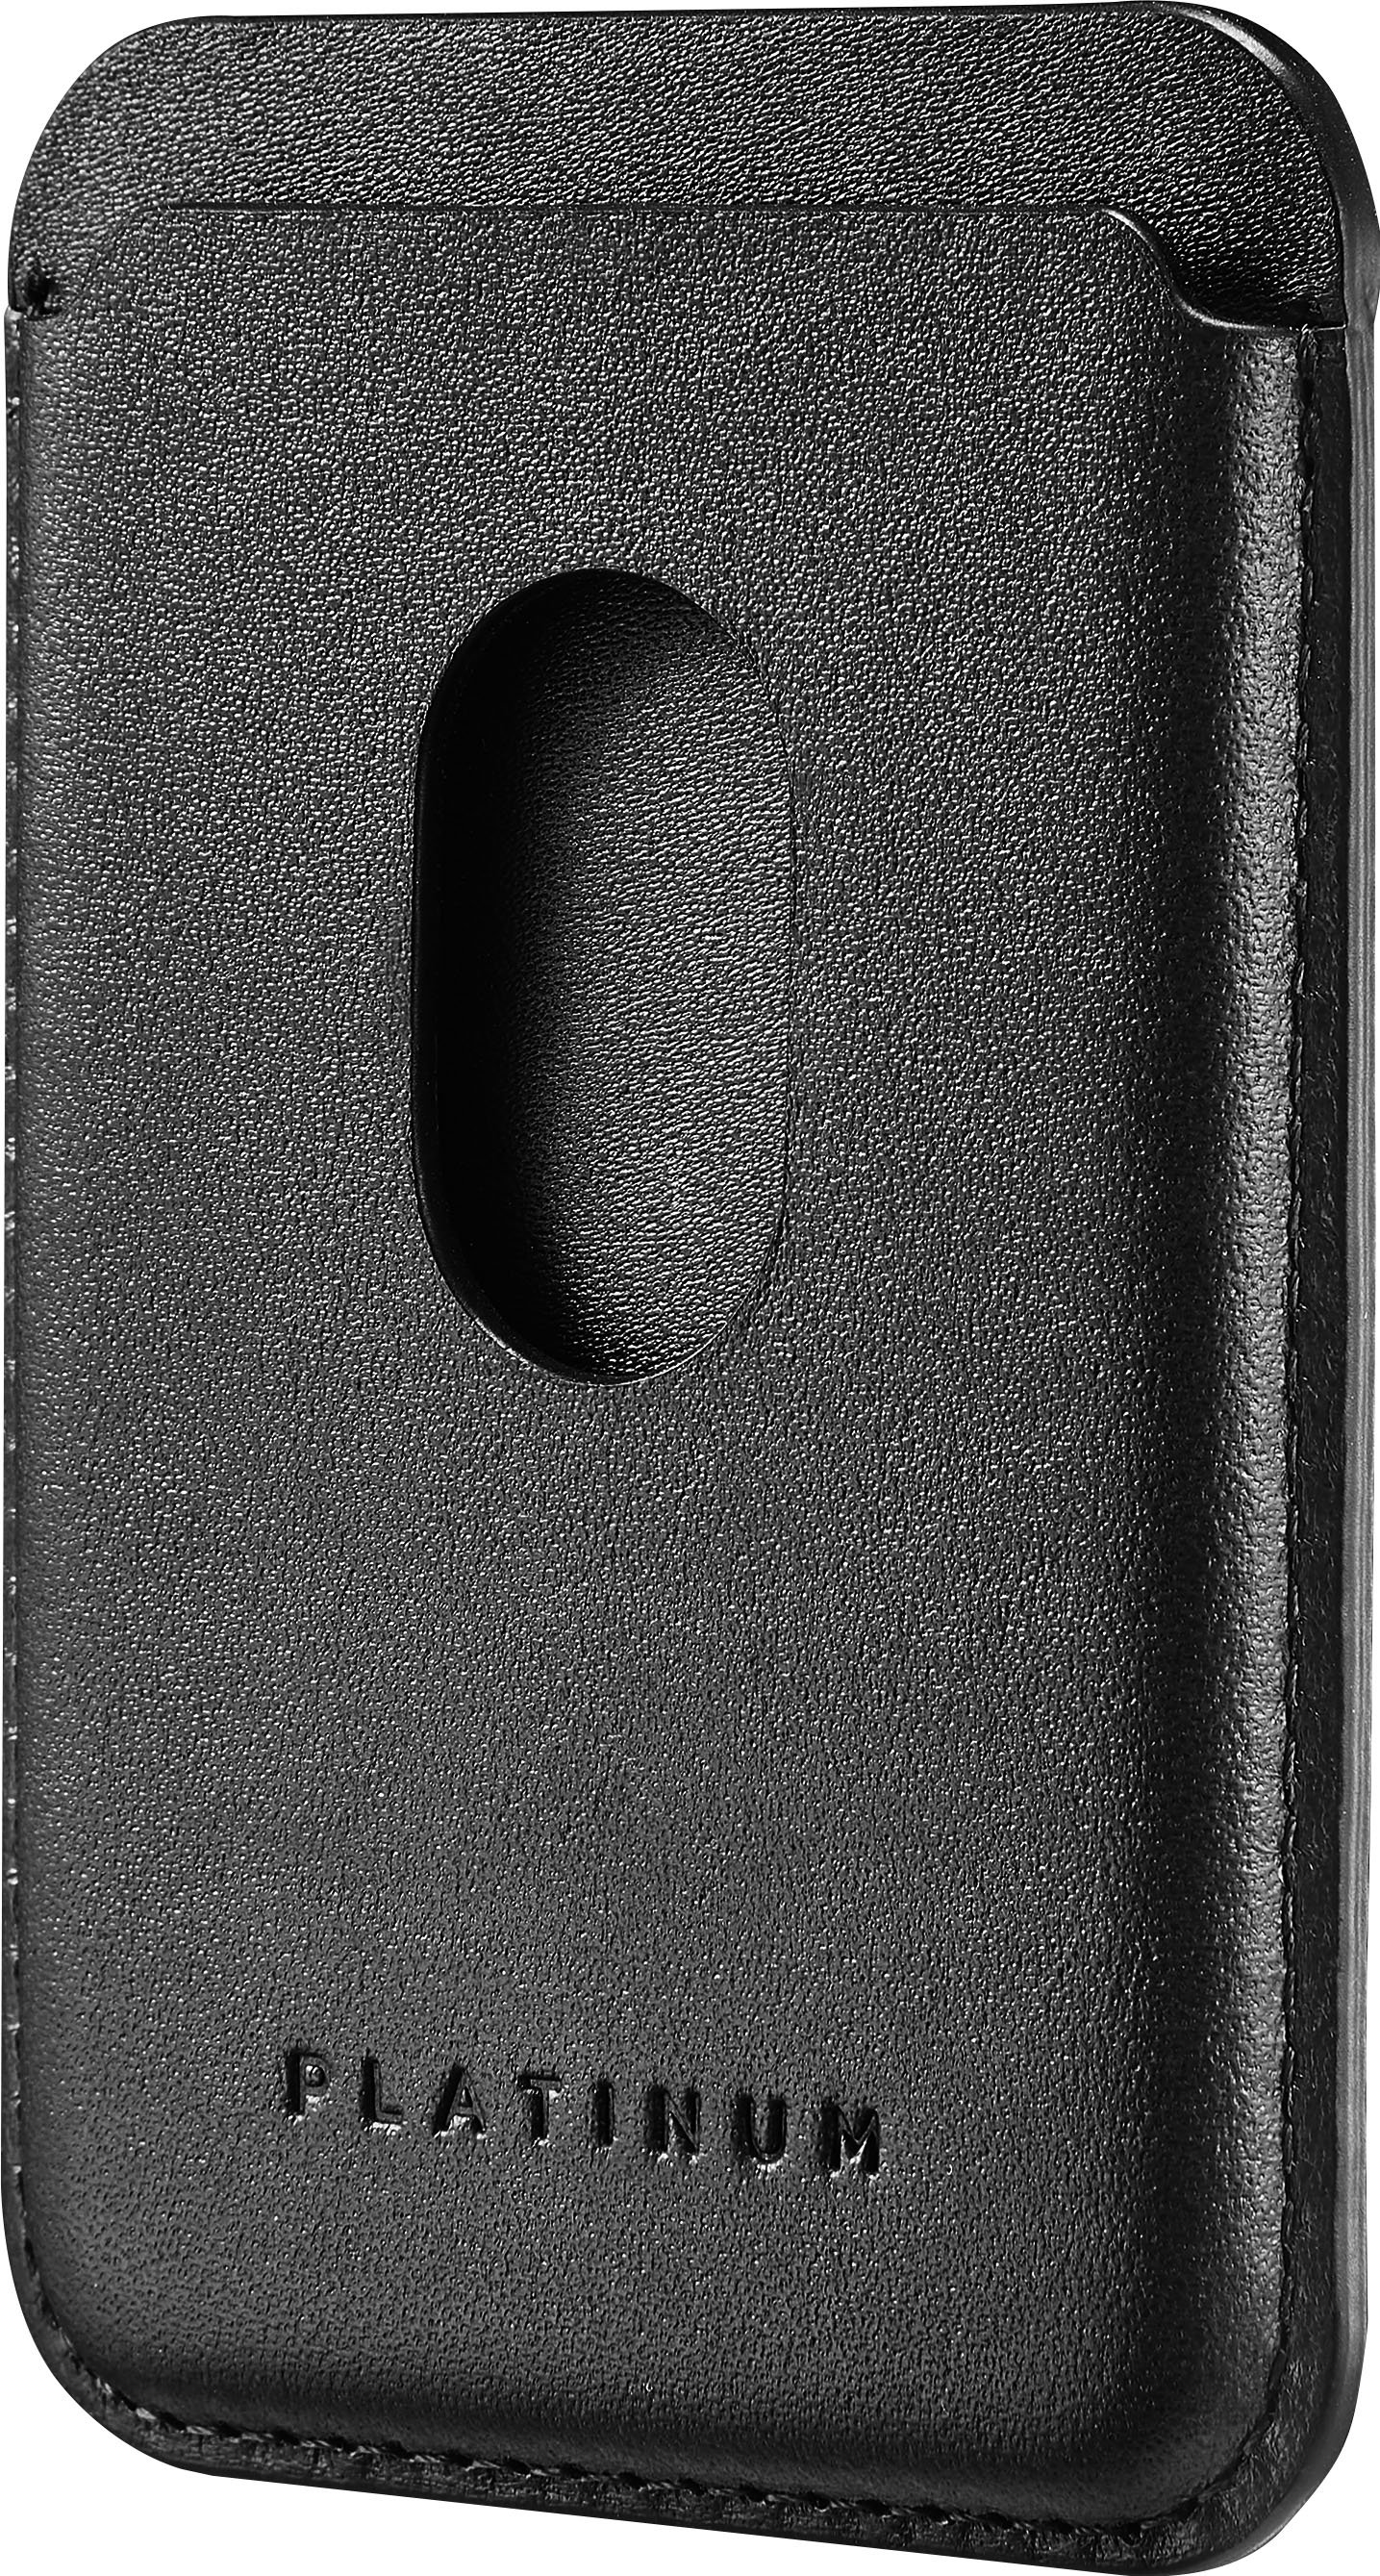 Best Buy: Platinum™ Leather Wallet Case for Apple® iPhone® XS Max Charcoal  PT-MAXLSBLCB